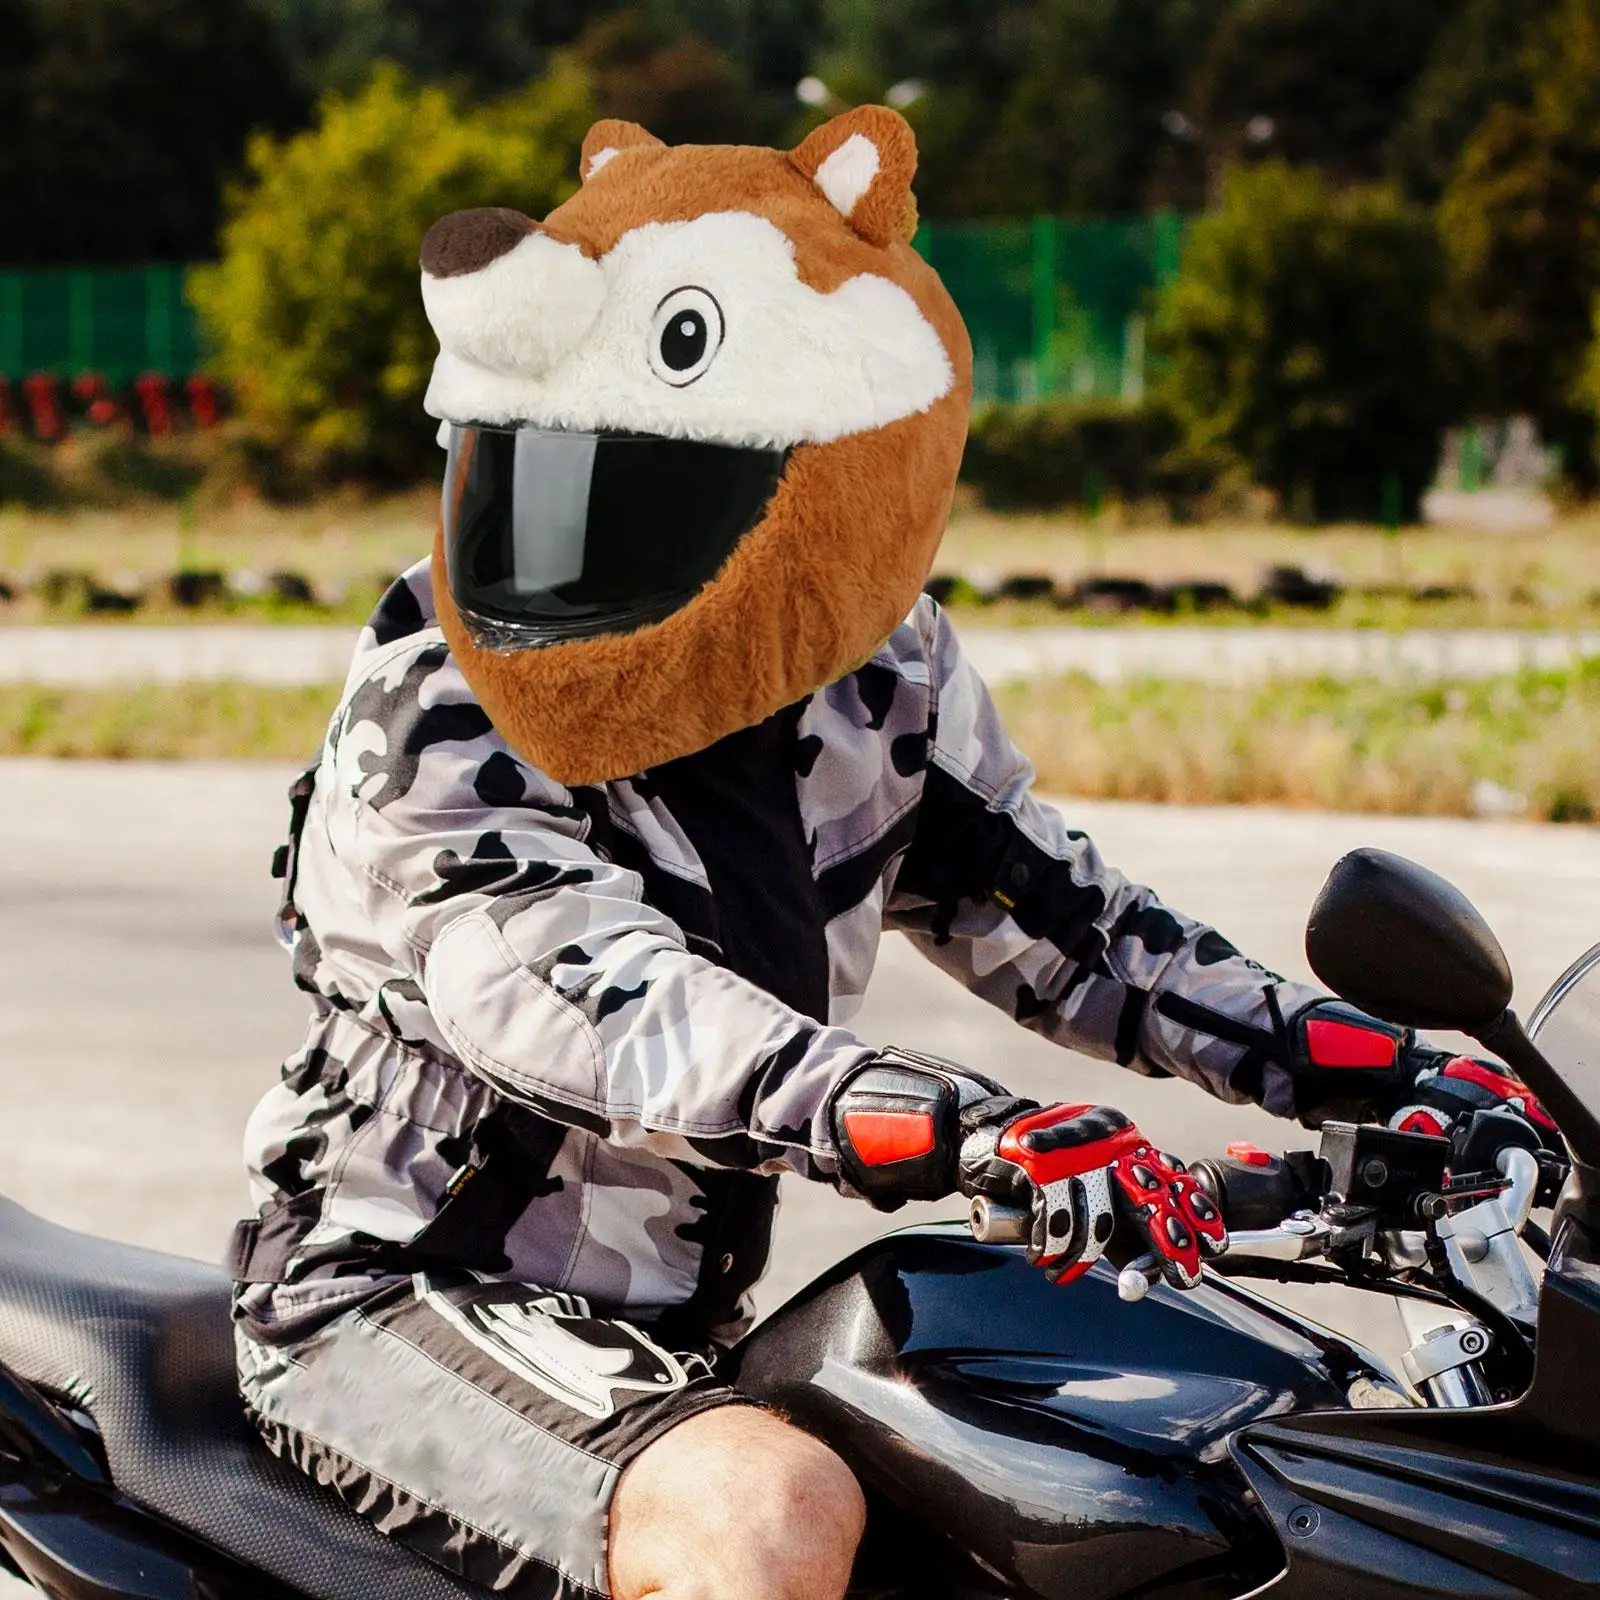 Motorcycle Helmet Cover Squirrel Shaped Soft Plush Gifts Funny Helmet Cover